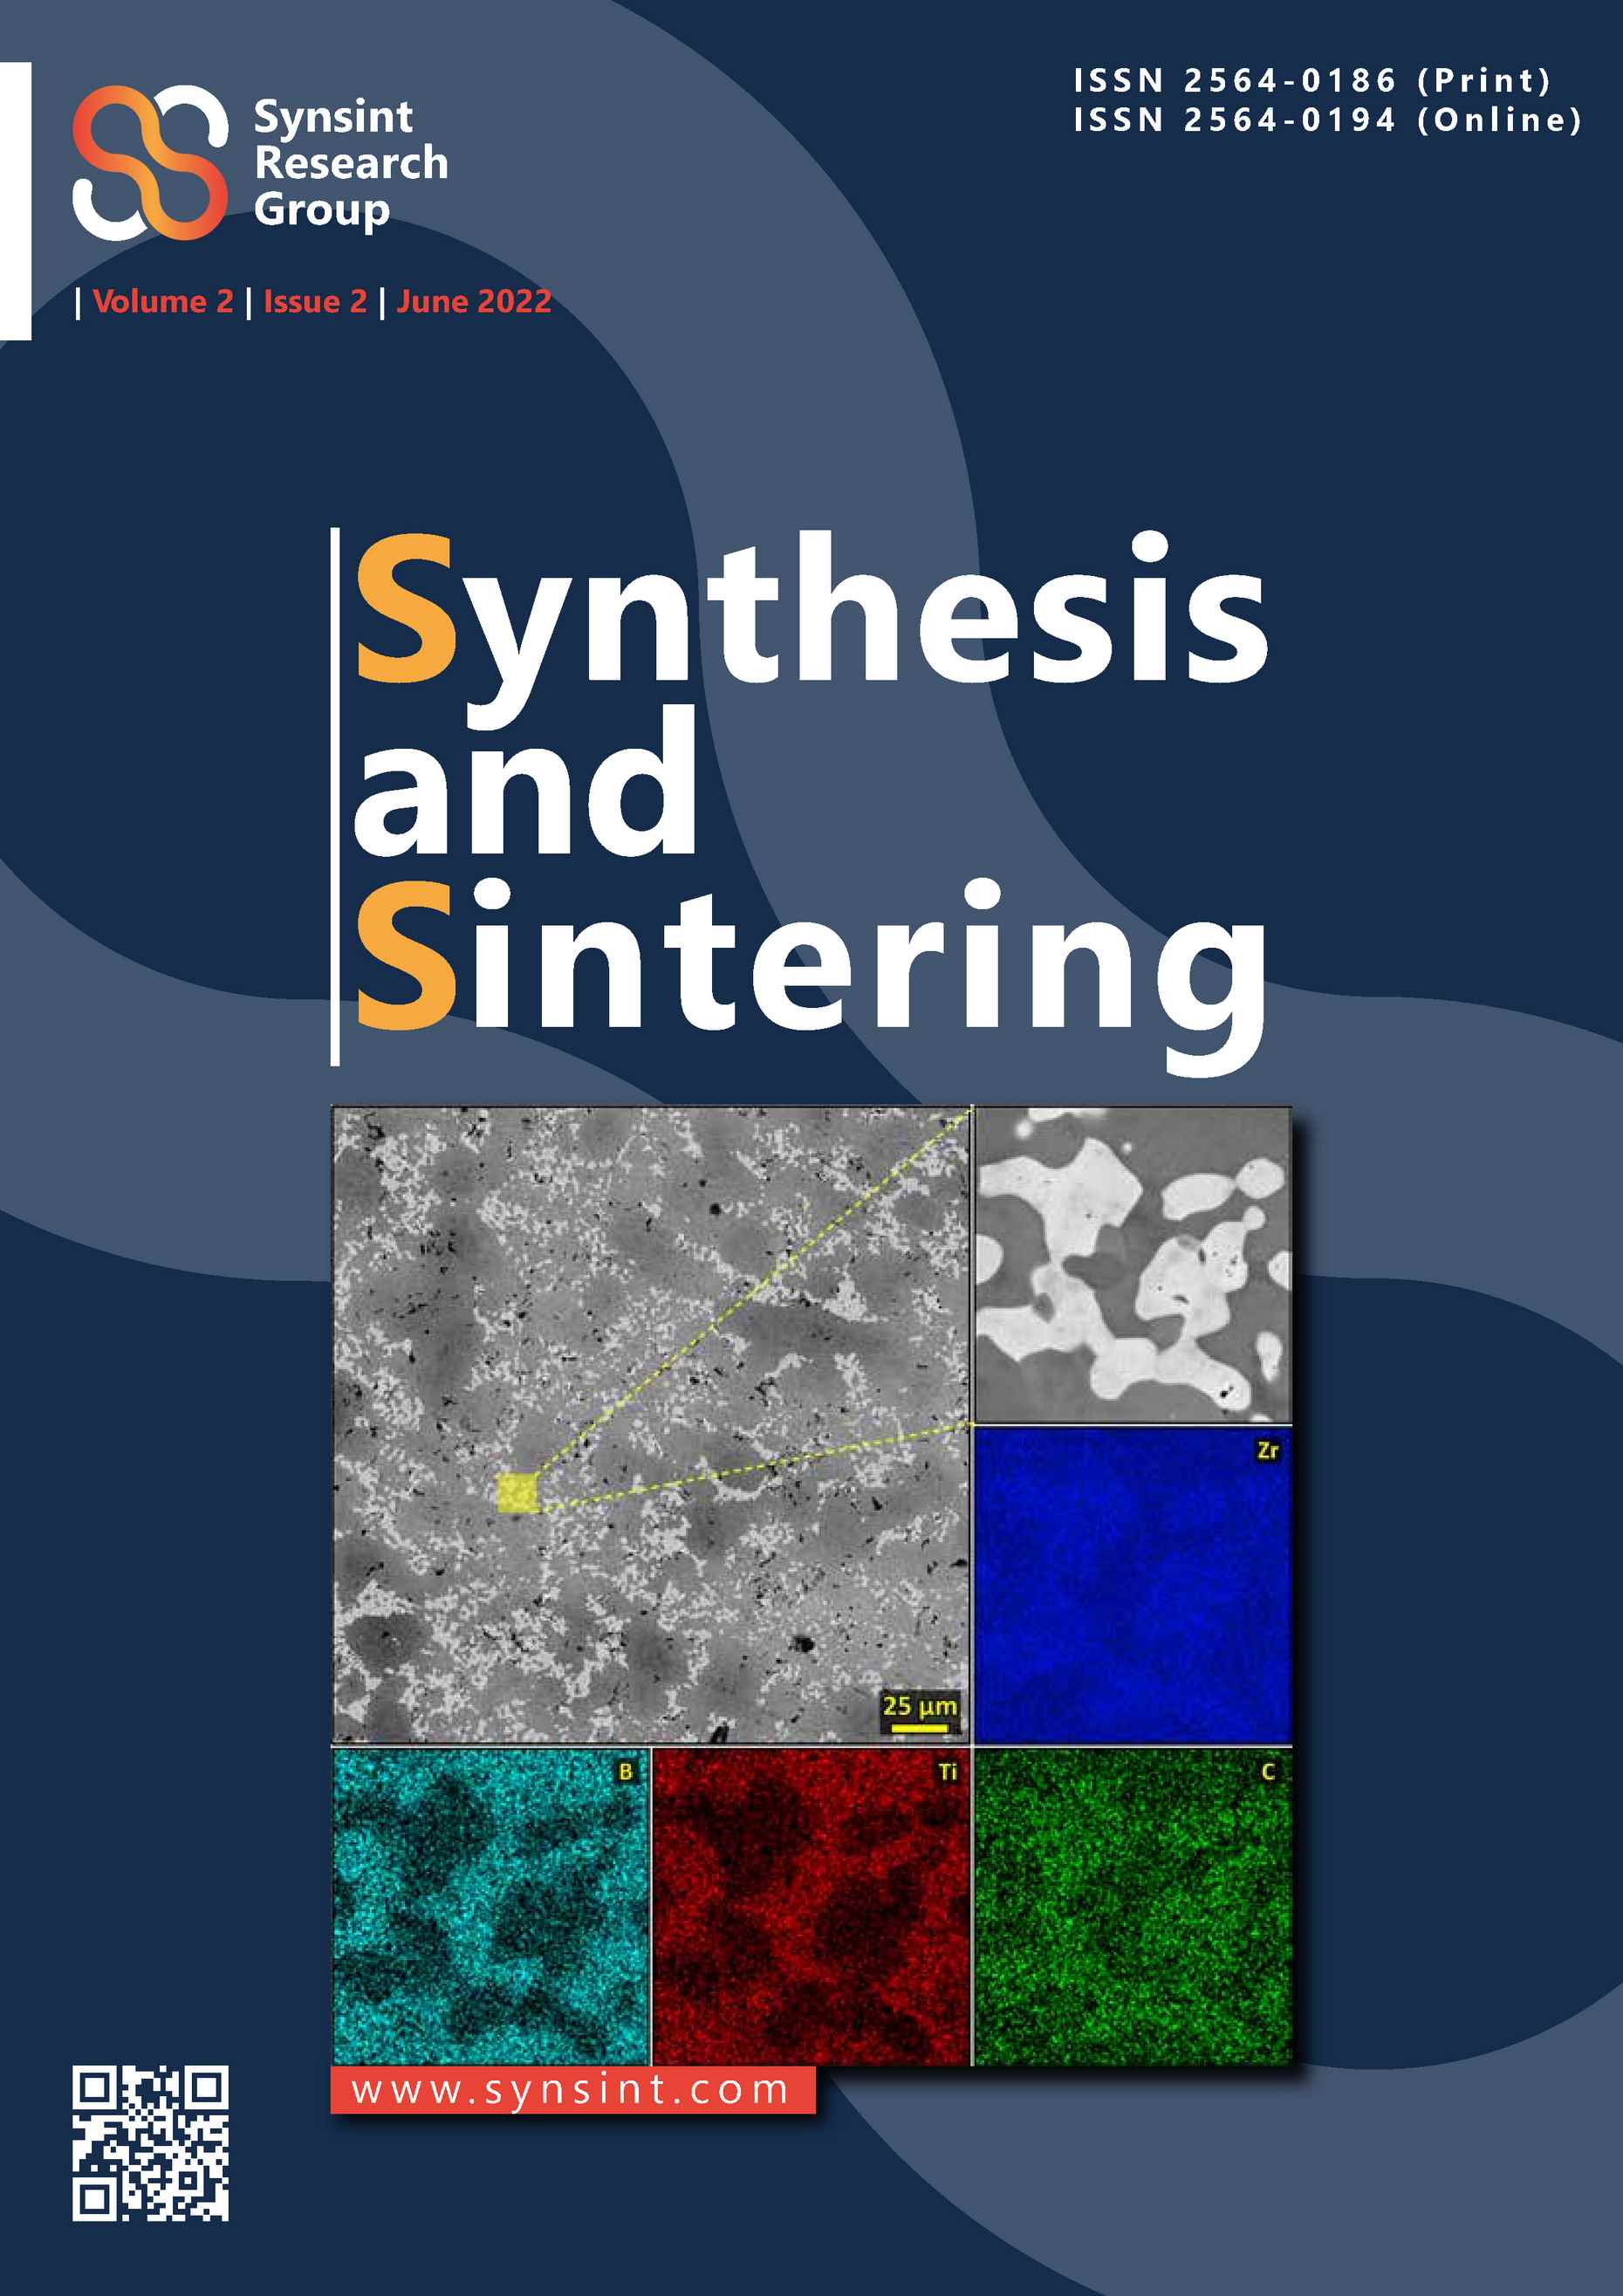 Synthesis and Sintering Vol. 2 No. 2 (2022)